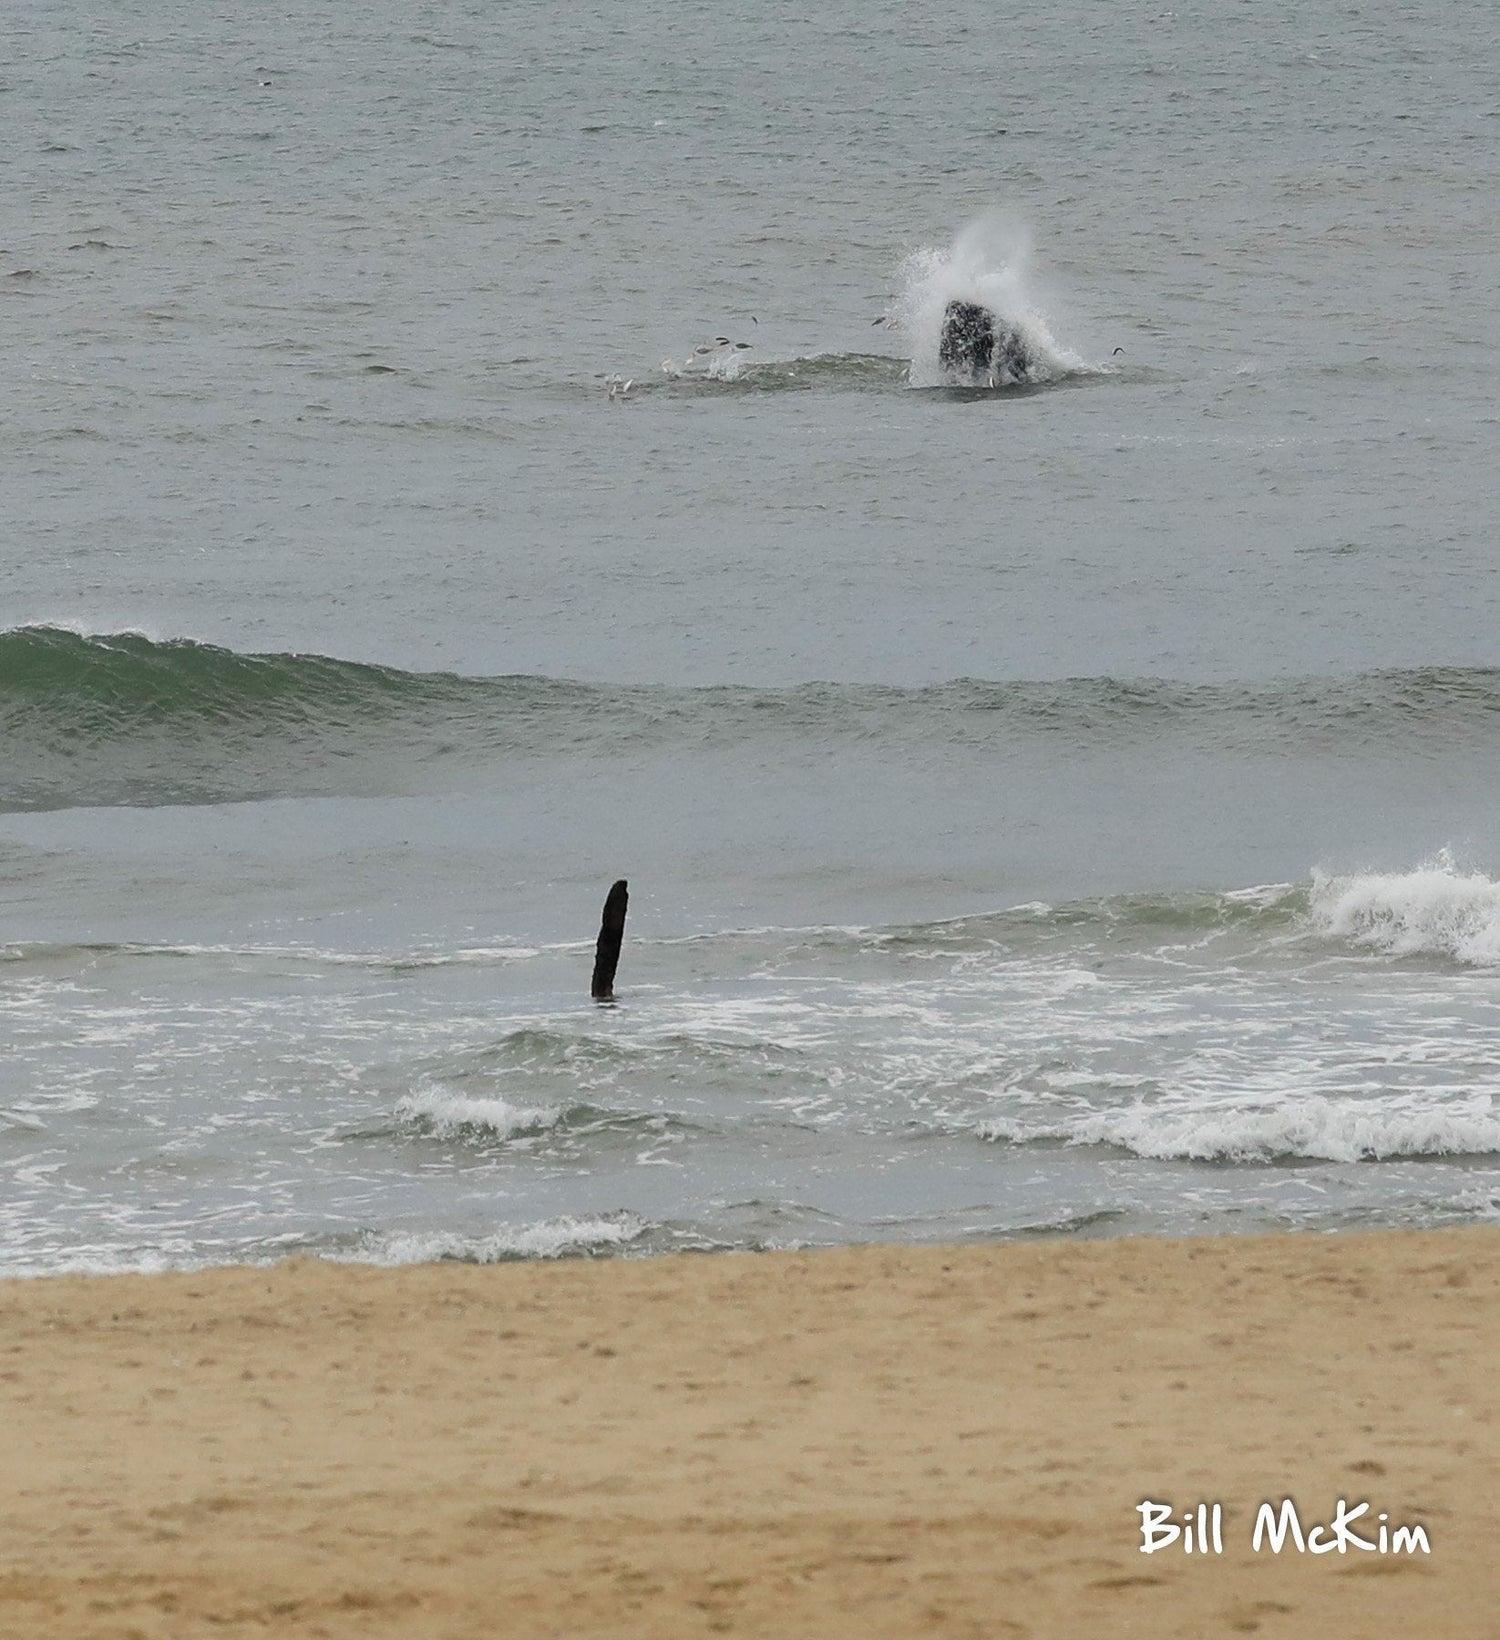 2 Humpback Whales off the coast of Belmar this morning.